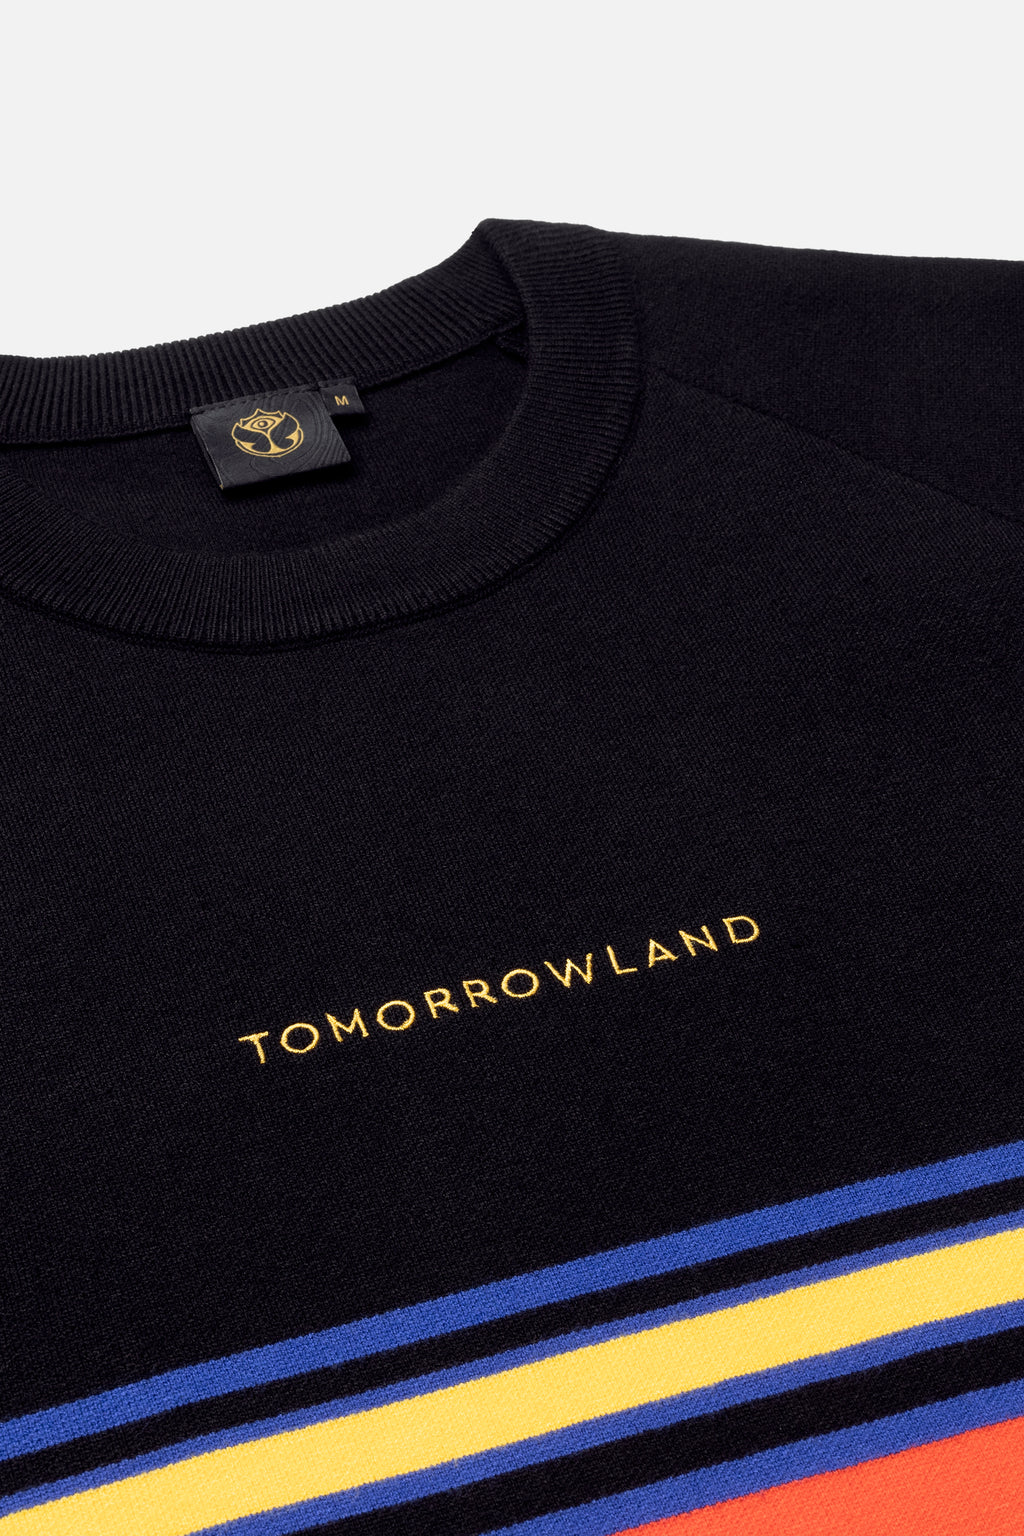 TOMORROWLAND KNITTED SWEATER